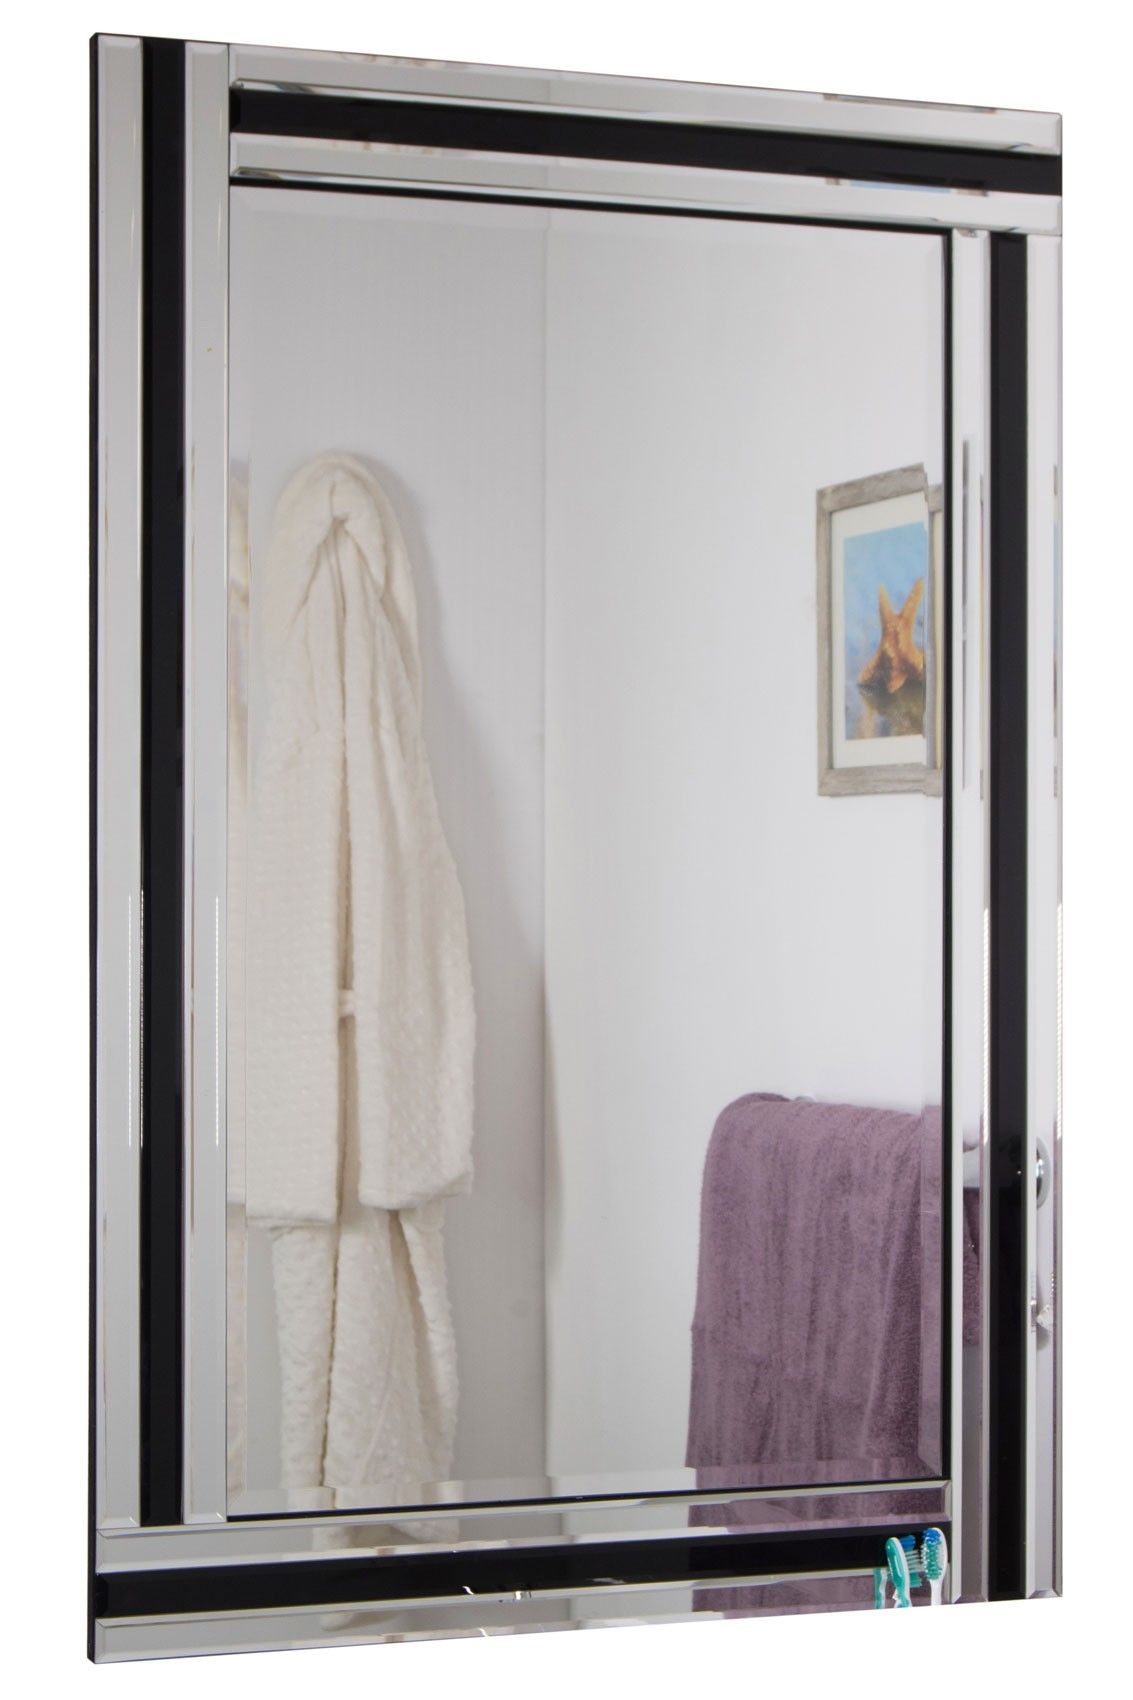 Large Black And Silver Triple Edge Bathroom Wall Mirror 1ft11 X 2ft11 Intended For Smoke Edge Wall Mirrors (View 8 of 15)